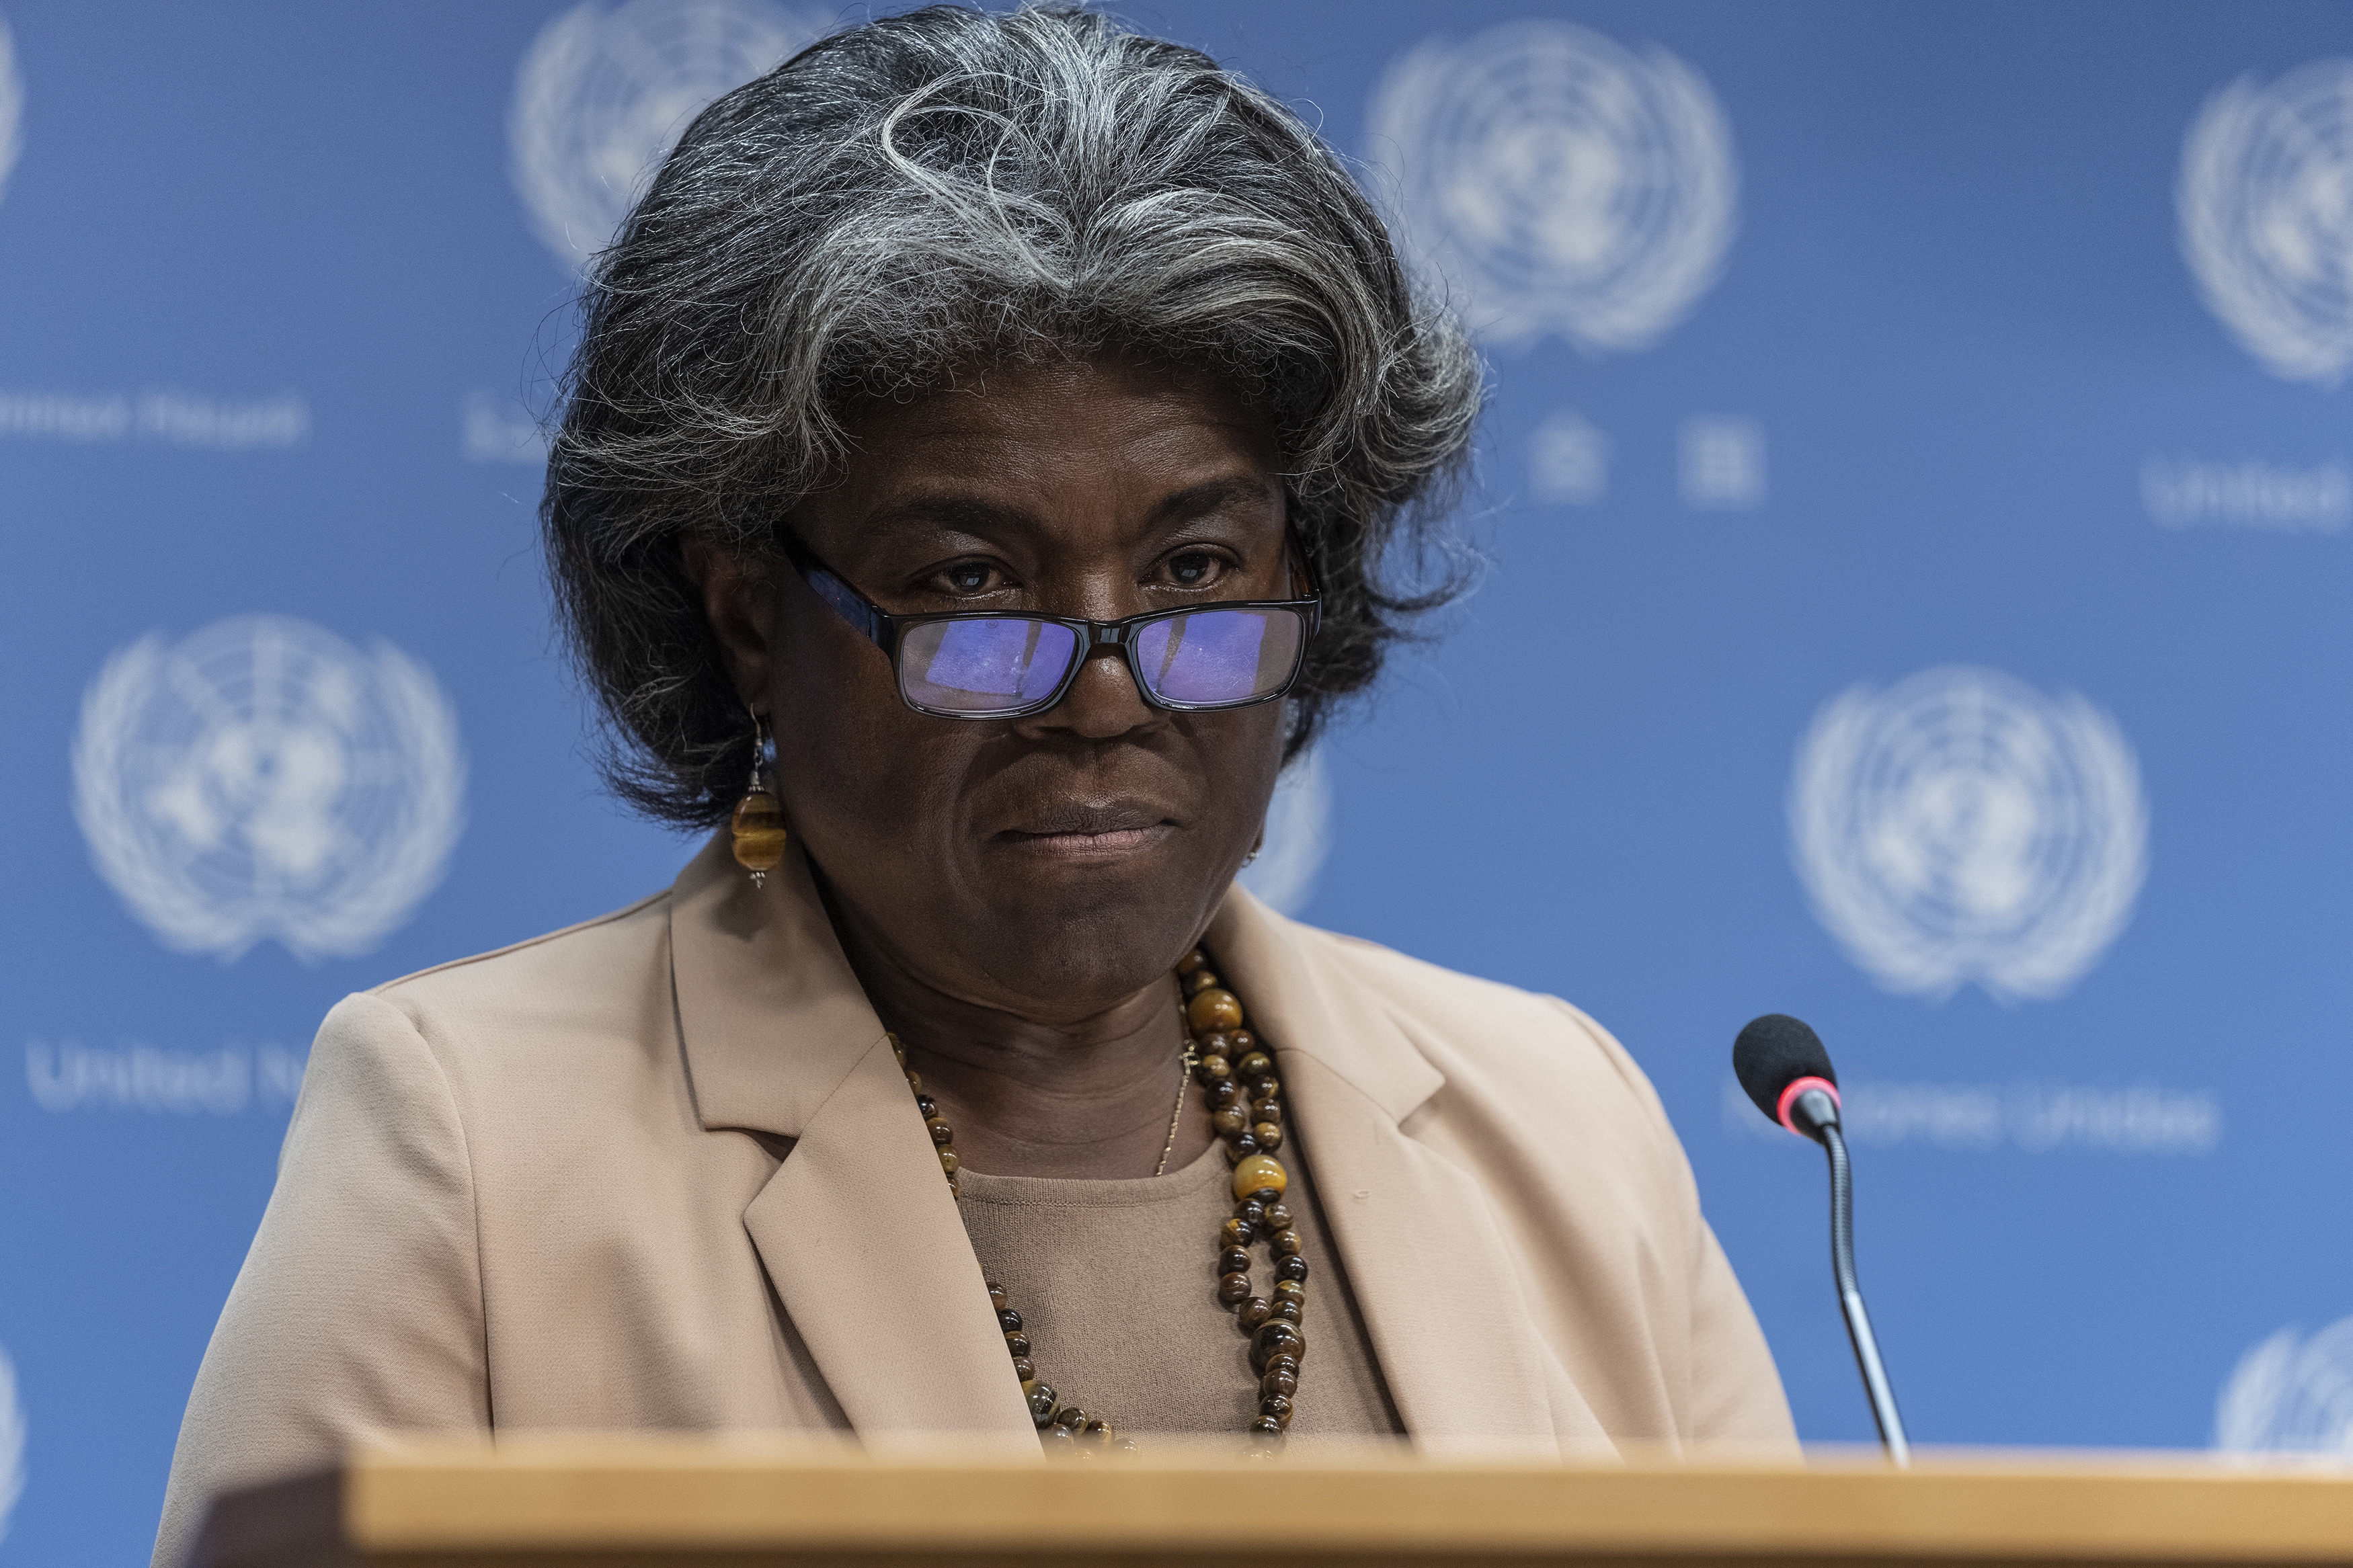 Press briefing by Ambassador Linda Thomas-Greenfield President of the Security Council for the month of May at UN Headquarters in New York, US, on May 3.